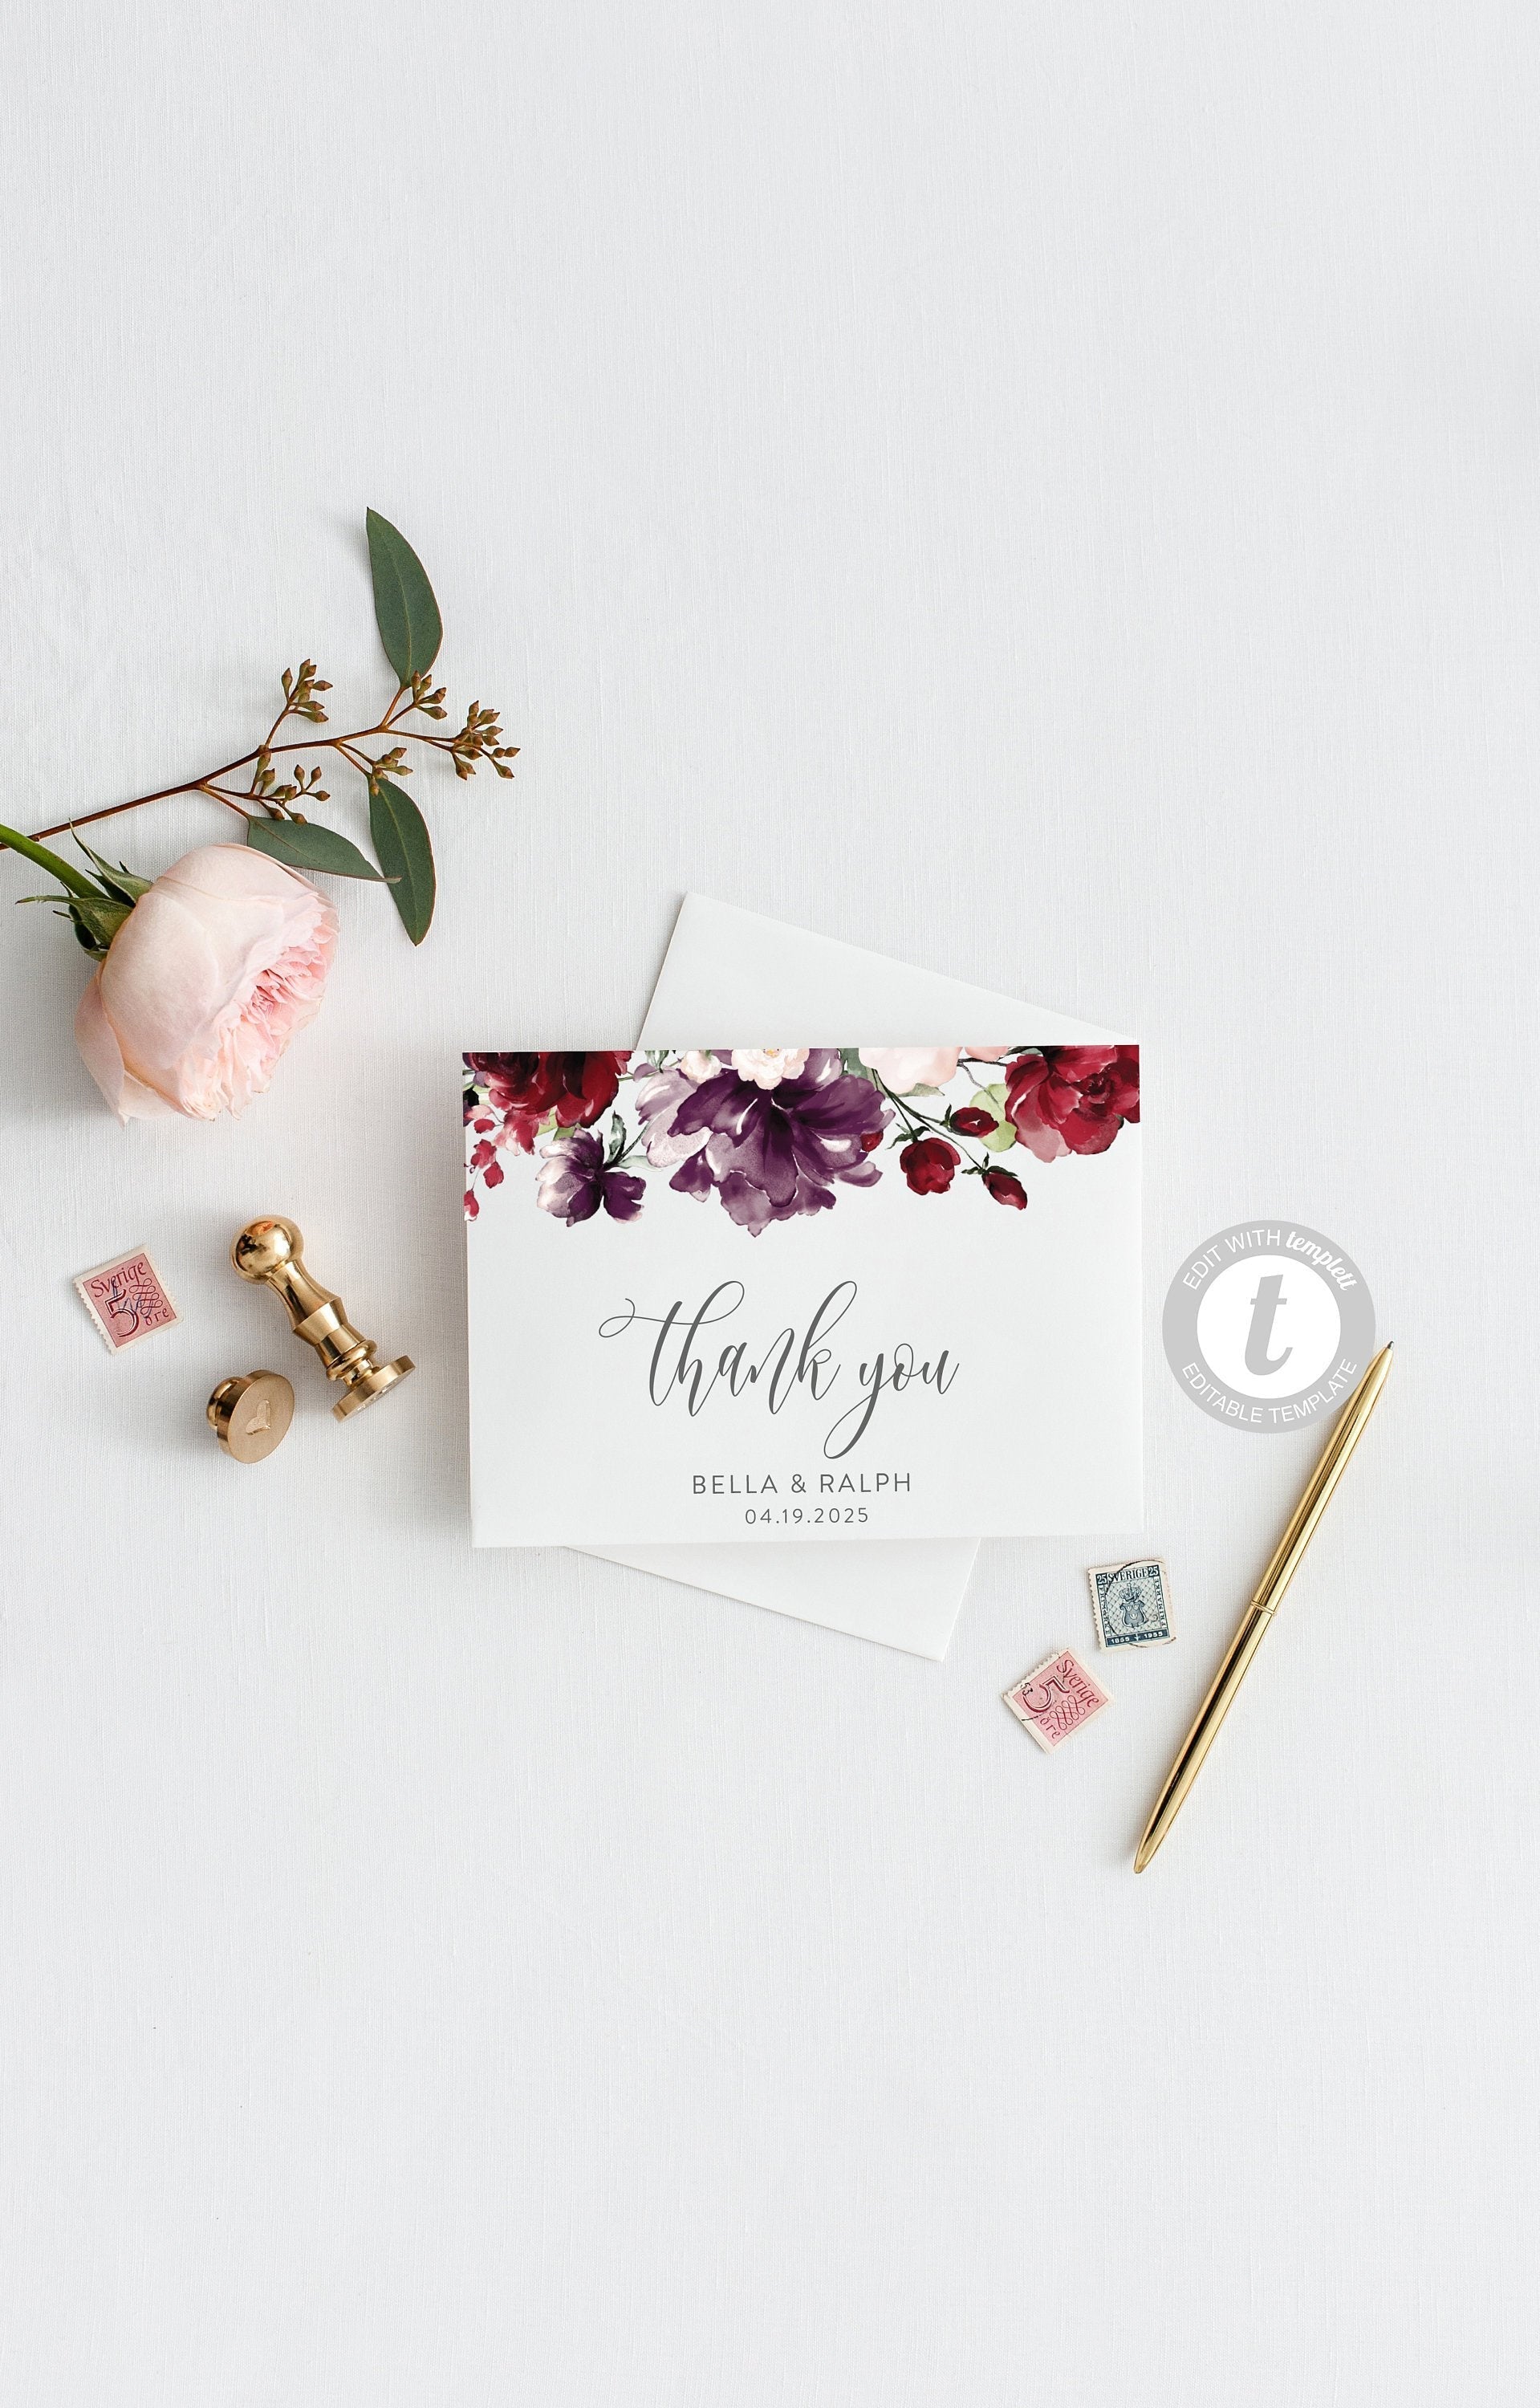 Elegant Wedding Thank You Card, Instant Download, Thank you Cards, Printable Thank You, Wedding Cards, Calligraphy, Burgundy Floral - Bella TAGS | TY | INSERTS SAVVY PAPER CO